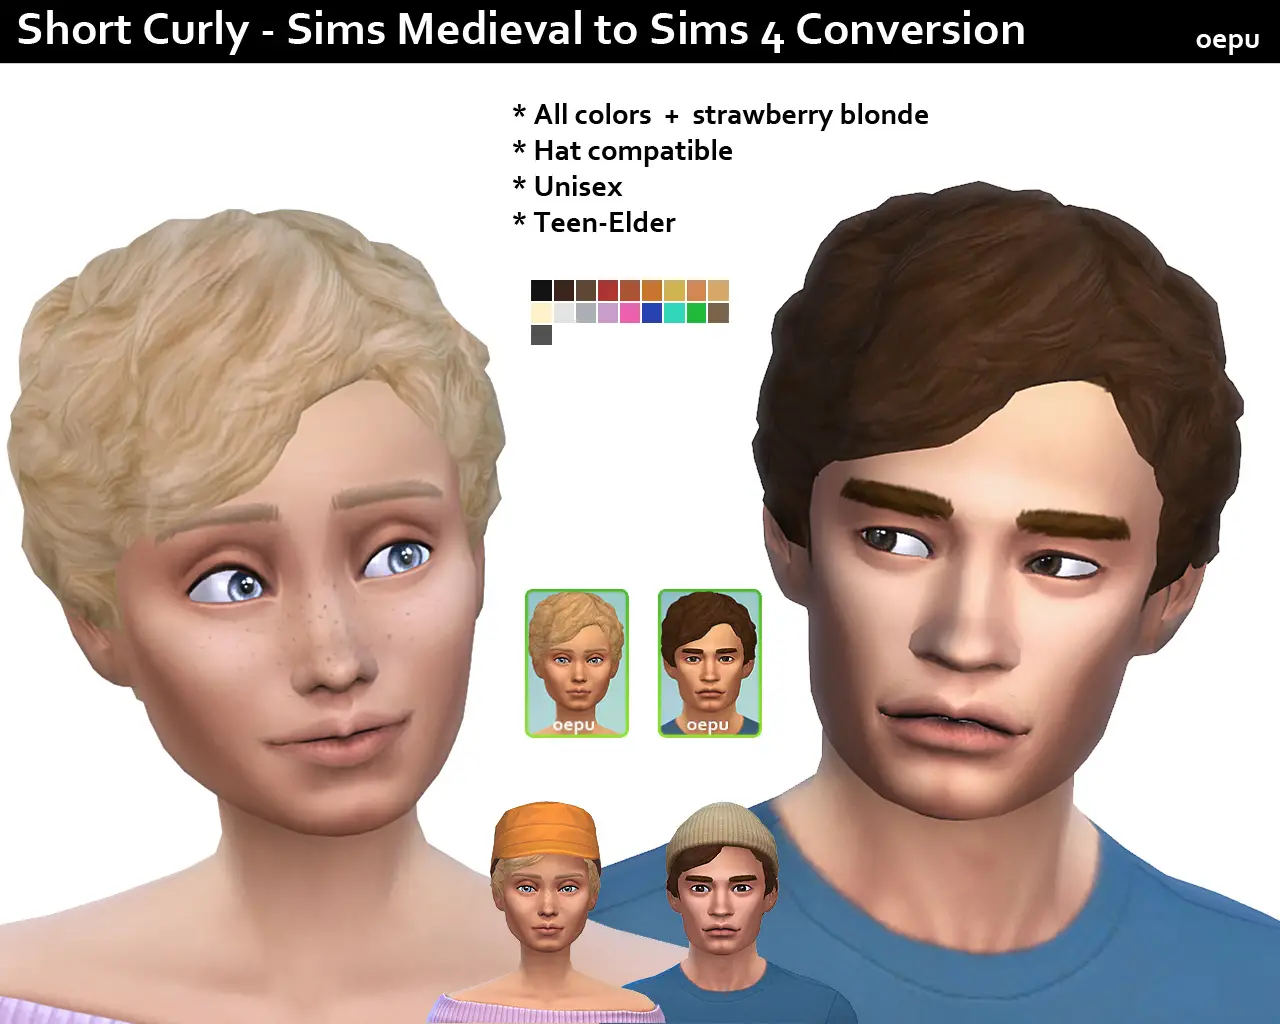 Sims 4 Hairs Mod The Sims Sims Medieval To Sims 4 Conversion Short